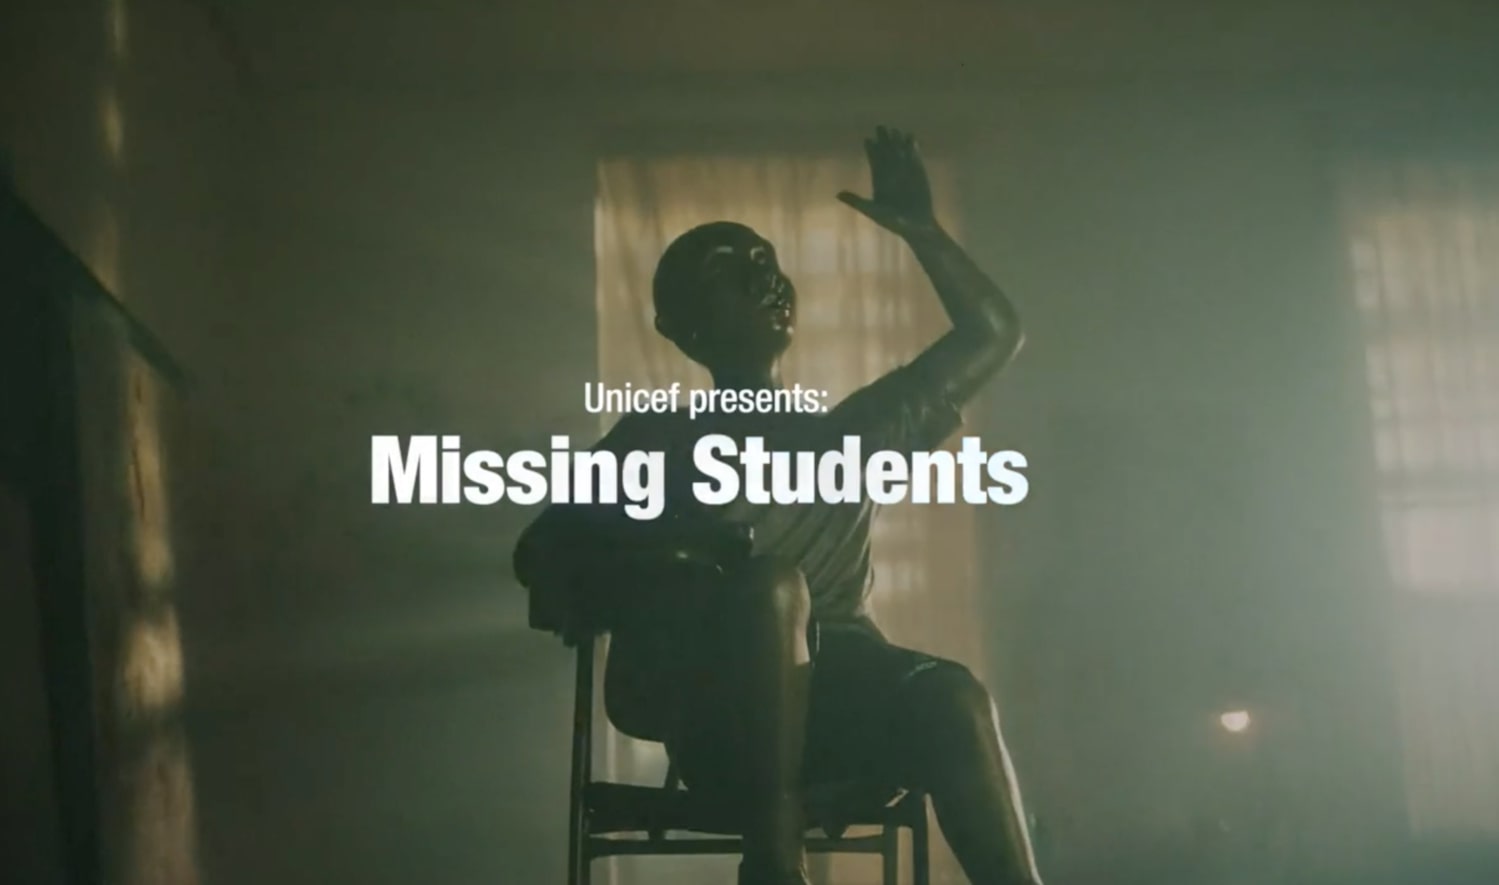 UNICEF, Monument to Education, Missing Students, Campaigns of the World